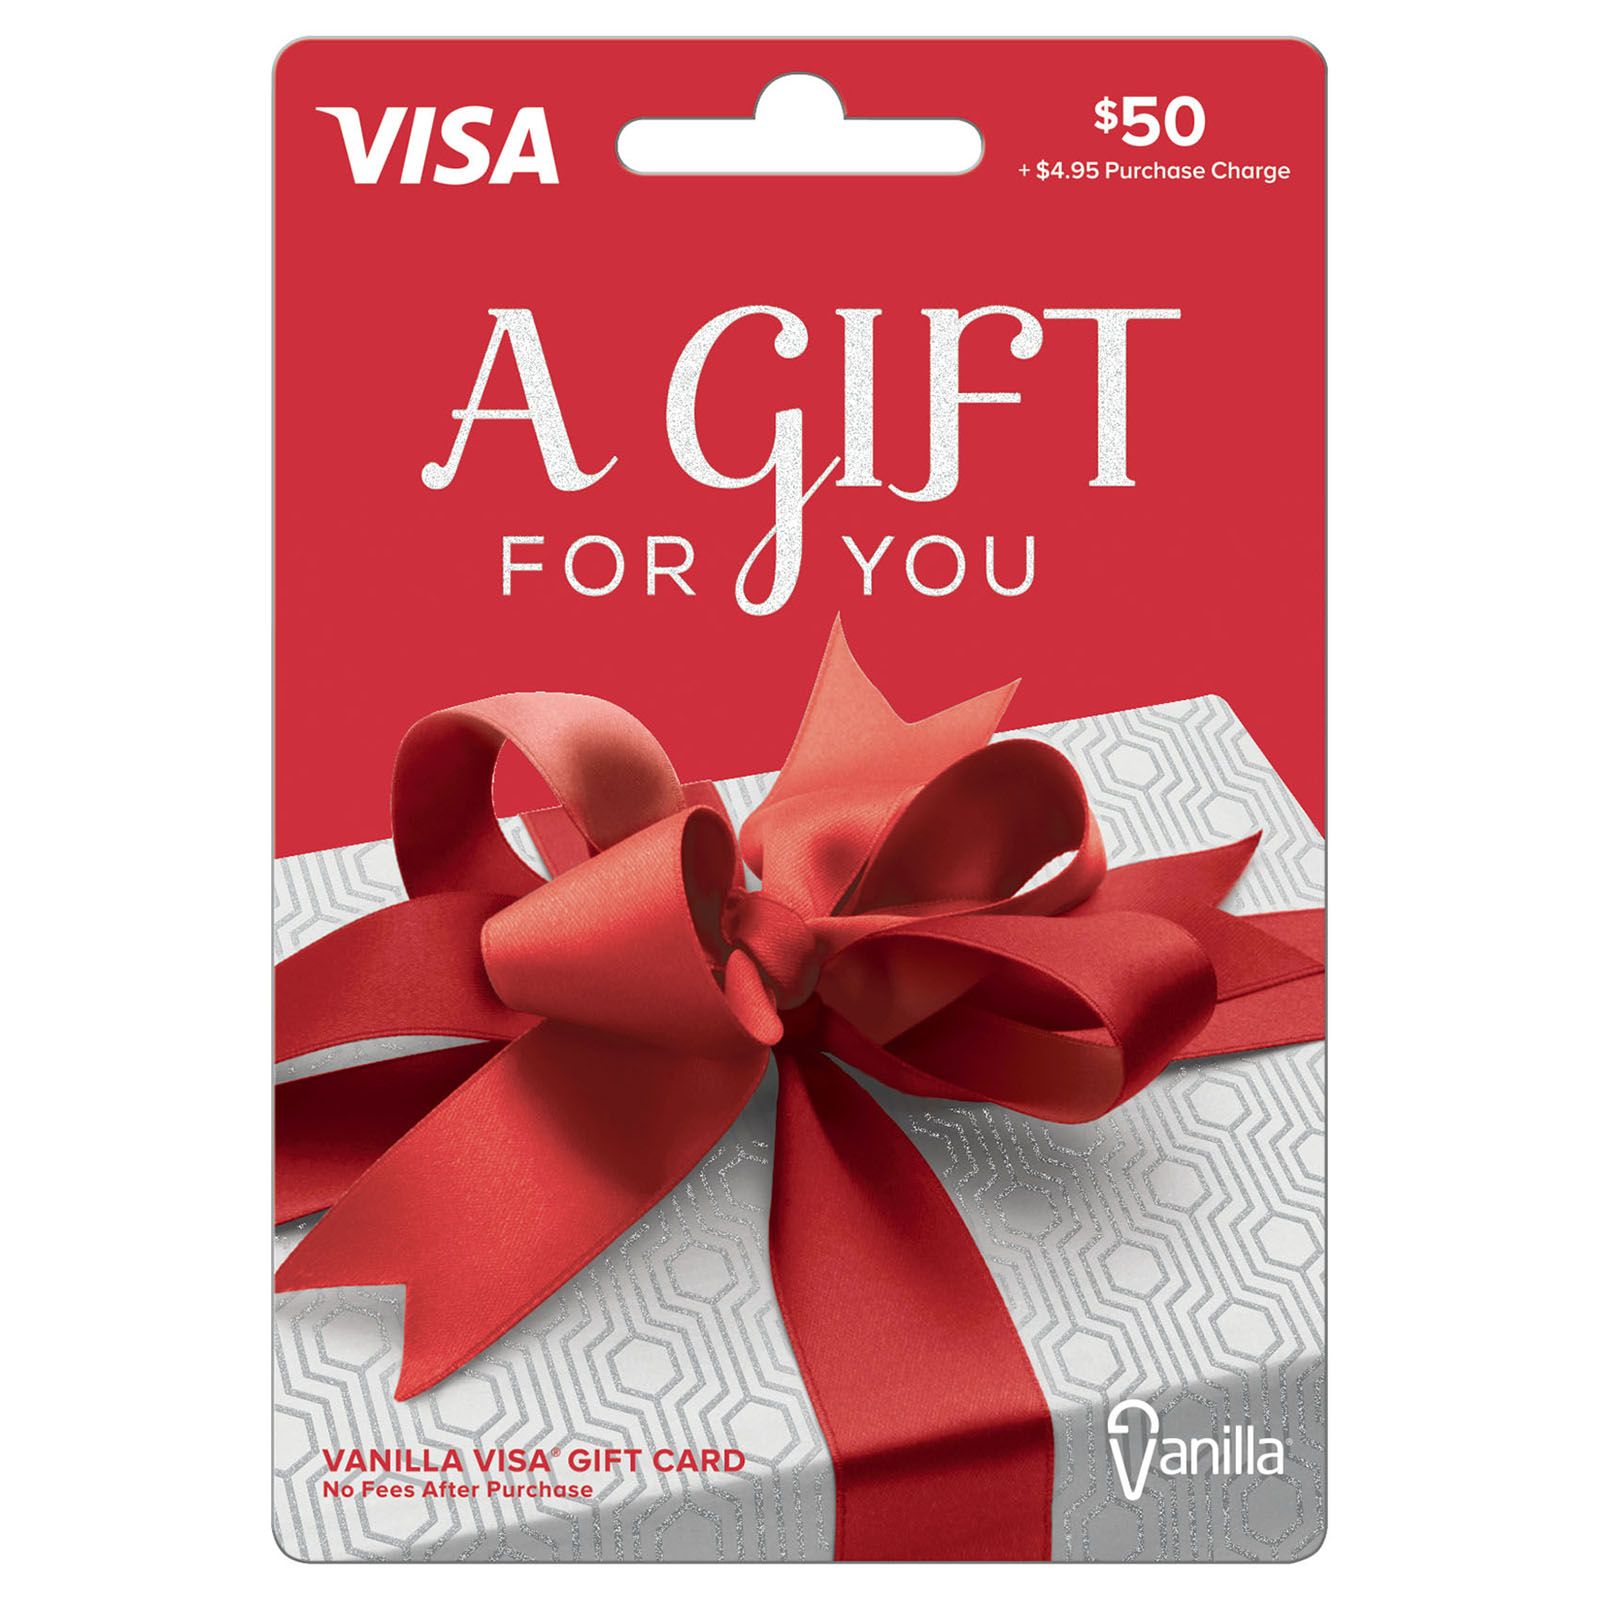 can you use visa gift cards on xbox